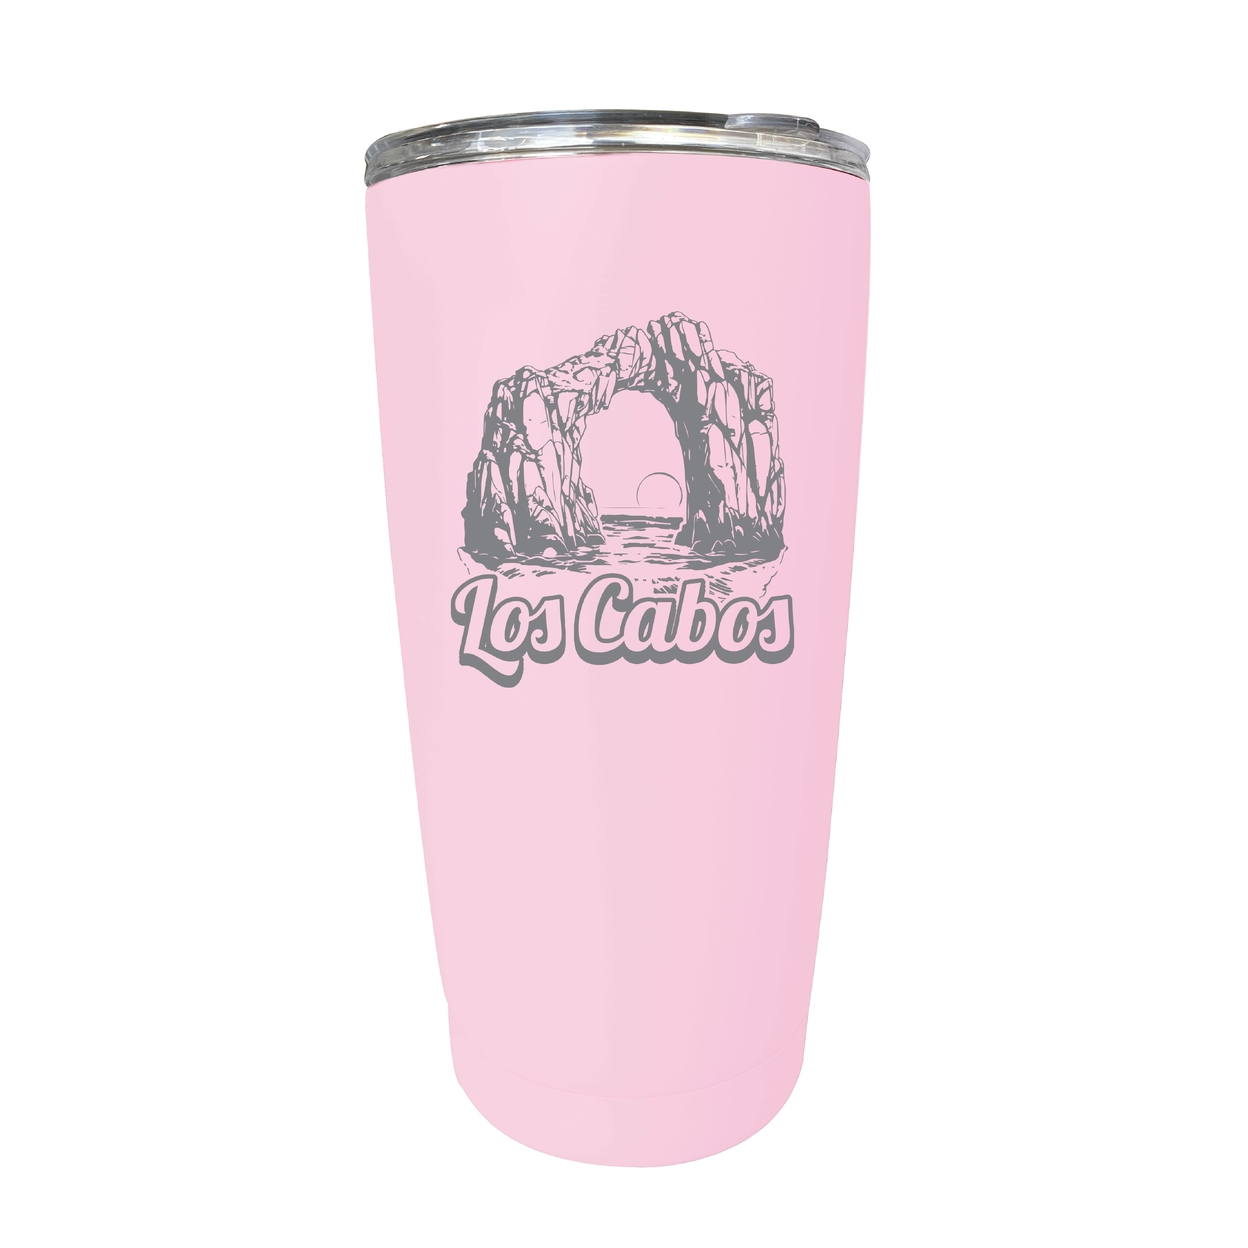 Los Cabos Mexico Souvenir 16 Oz Engraved Stainless Steel Insulated Tumbler - Pink,,2-Pack